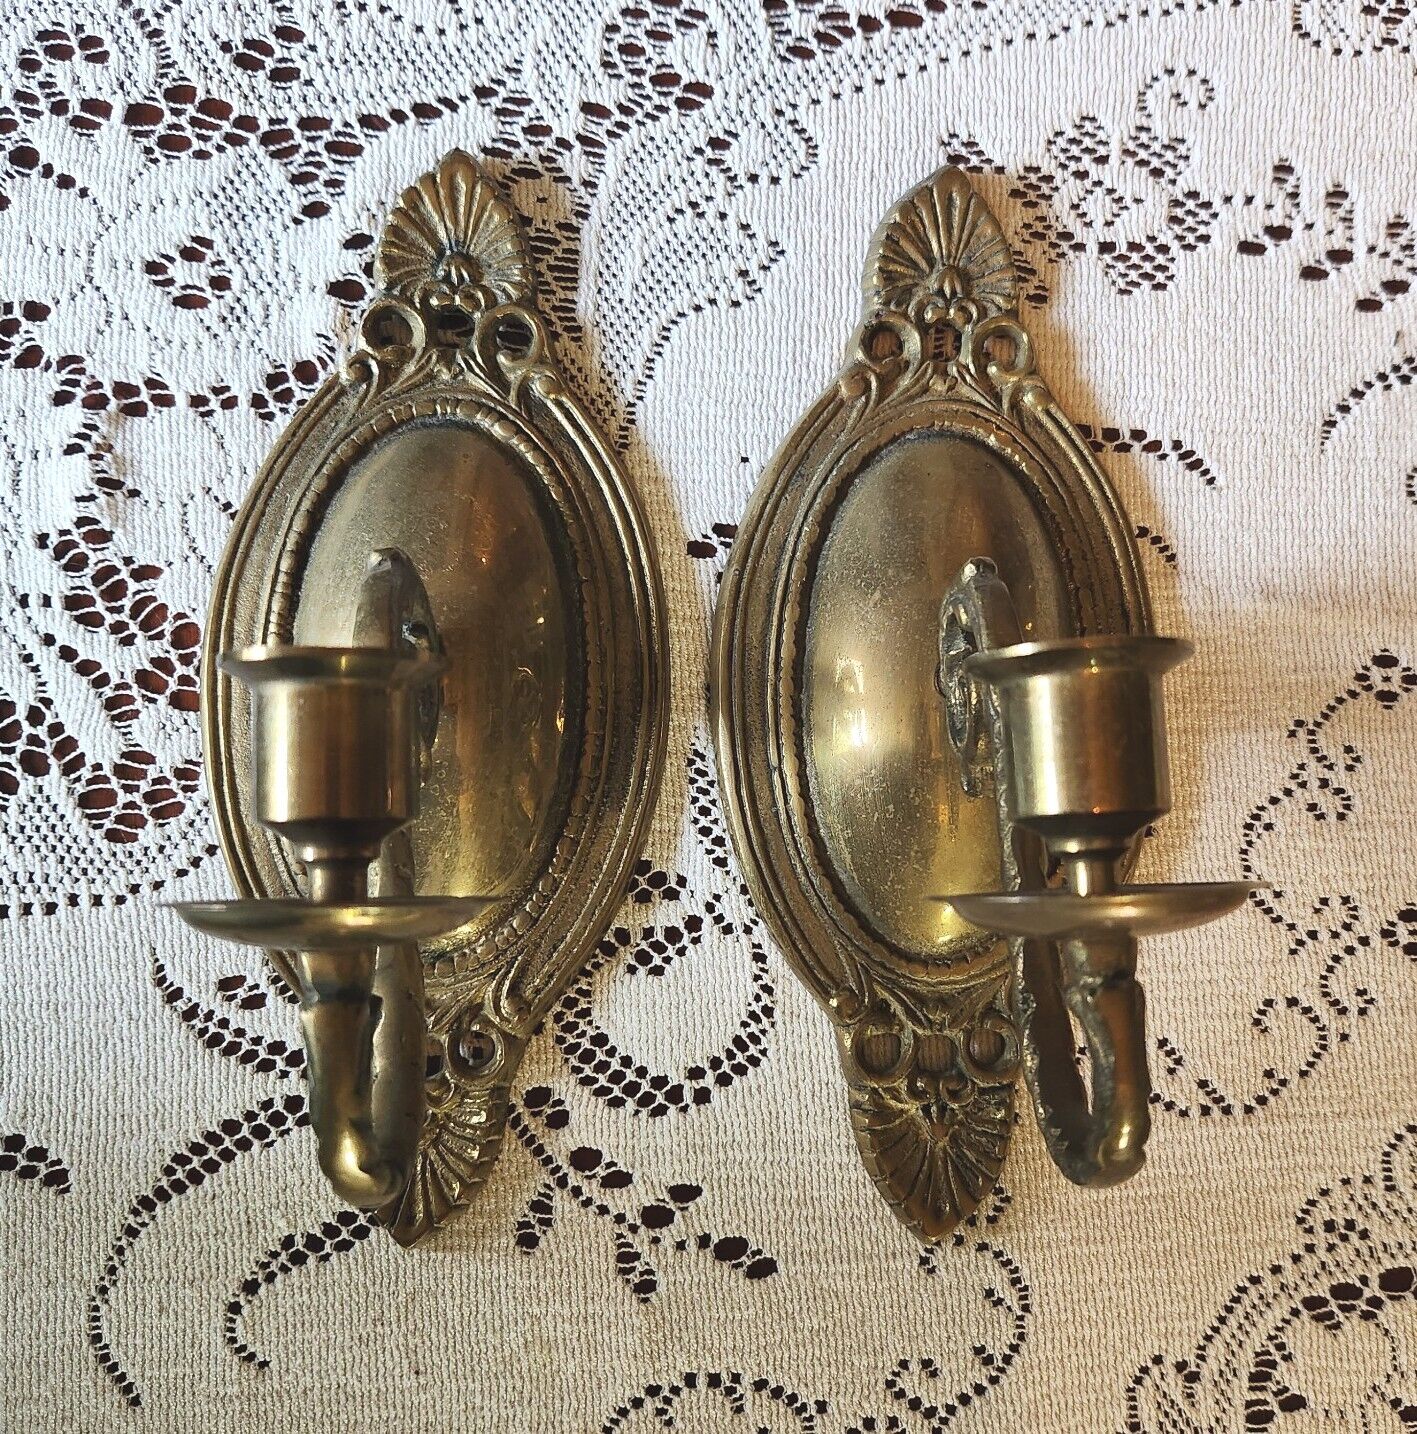 Vintage Brass Wall Sconces Candle/Taper Holder Ornate Patina Academia Cottage